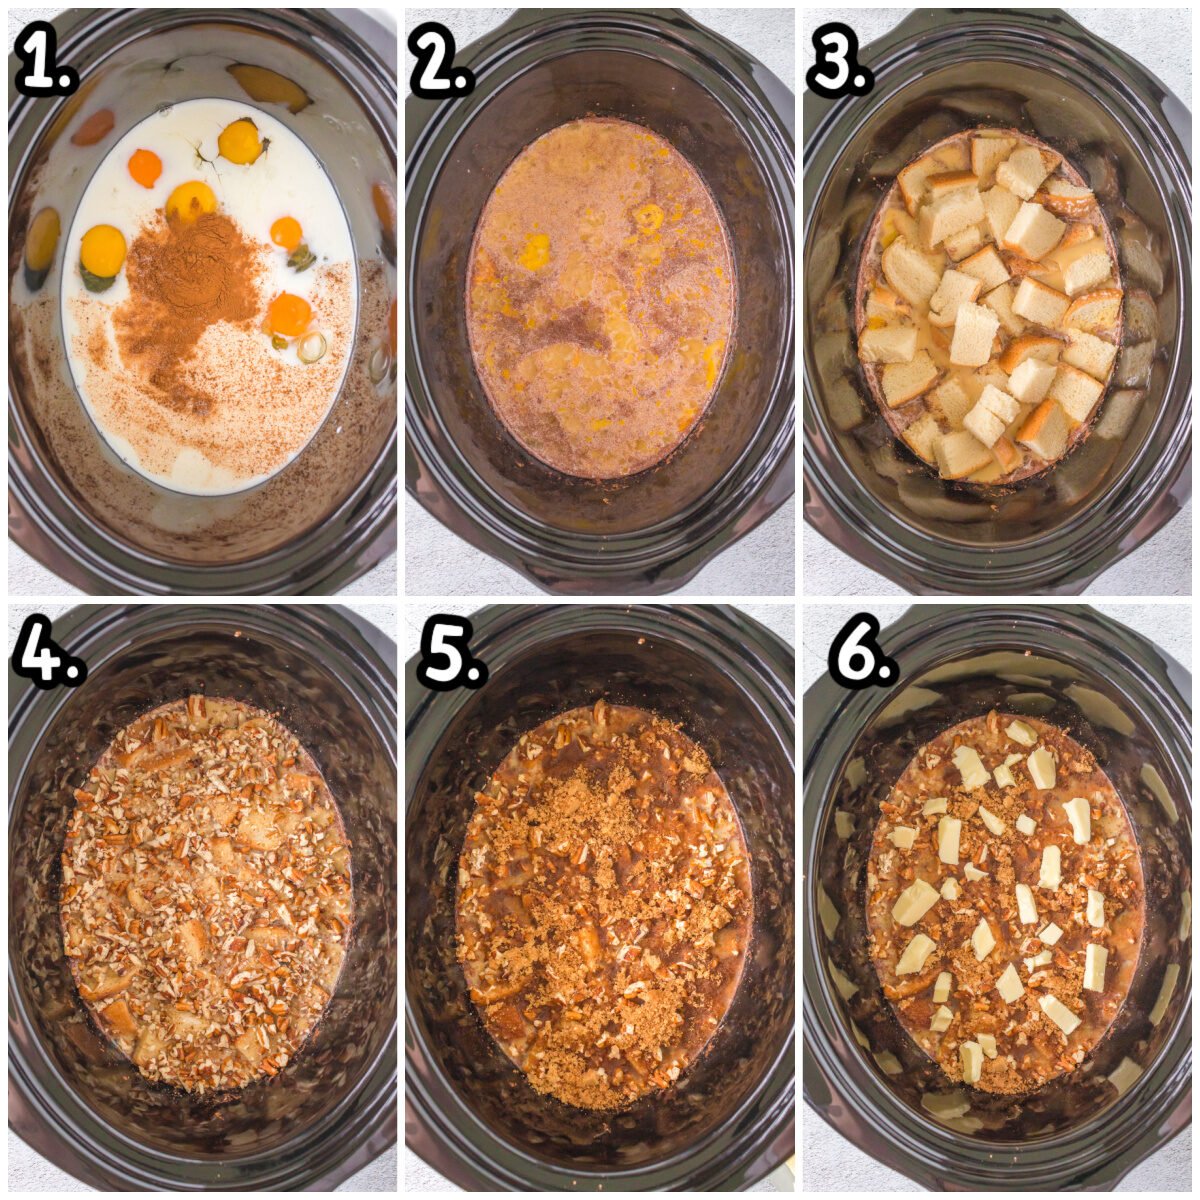 6 images about how to assemble french toast casserole in crockpot.